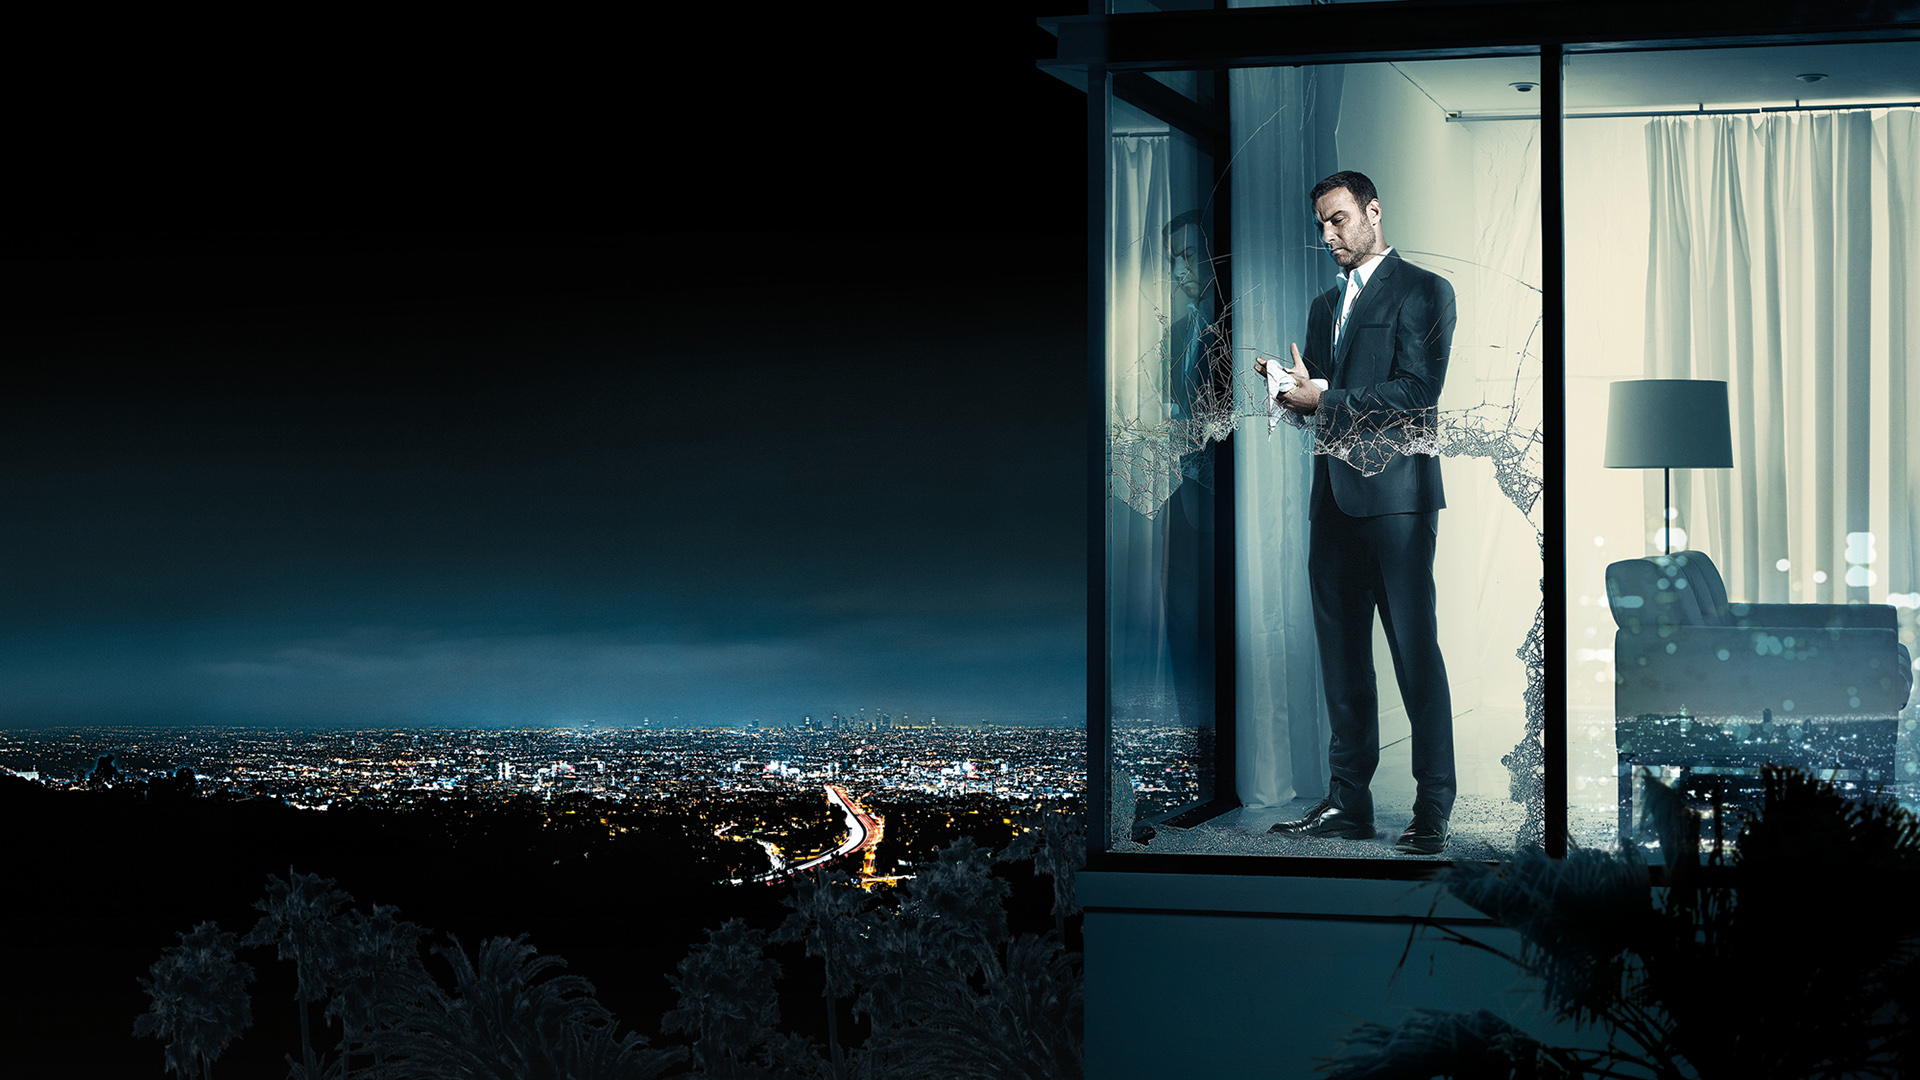 Ray Donovan Wallpaper And Background Image